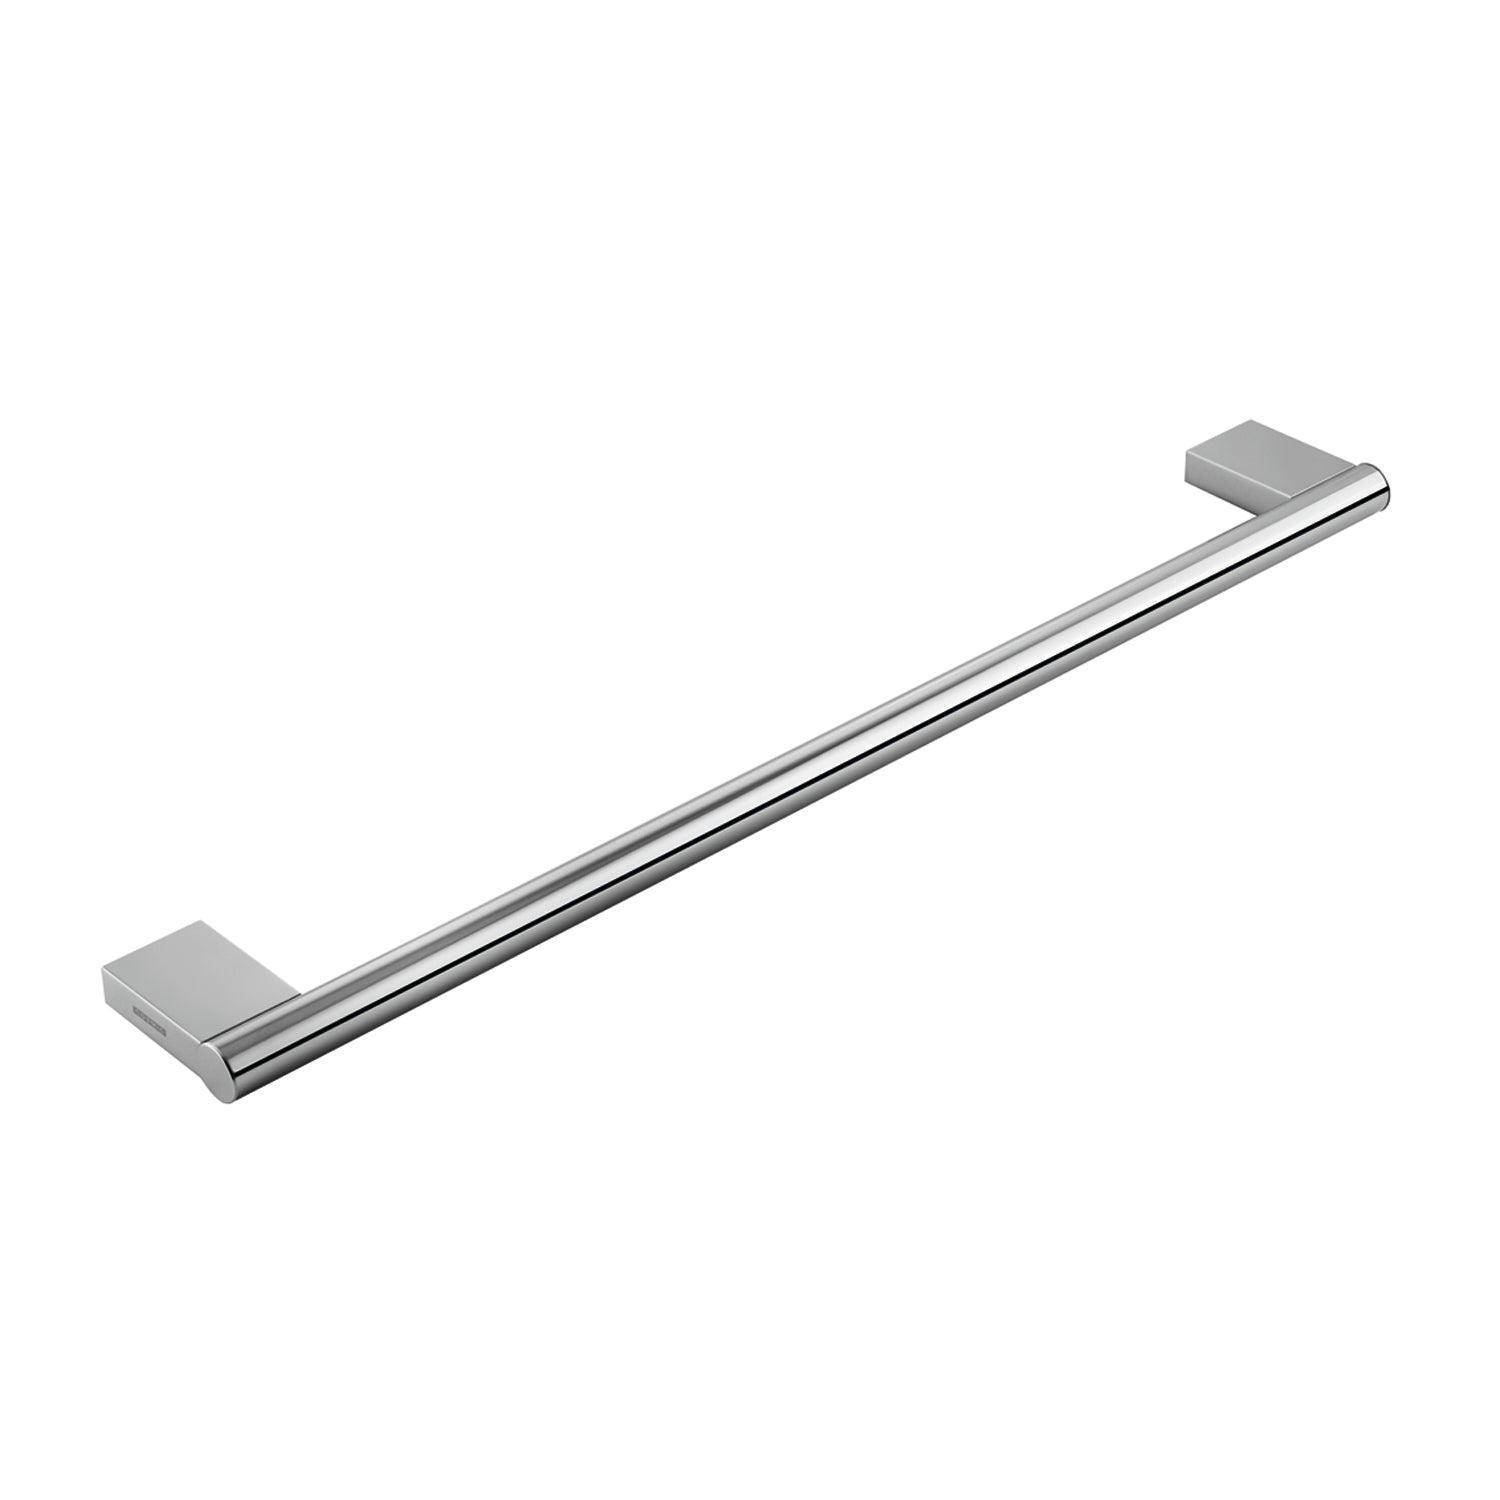 COSMIC Project Single Towel Bar, Wall Mount, Brass Body, Chrome Finish, 23-5/8 x 7/8 x 3-1/8 Inches (2510165)